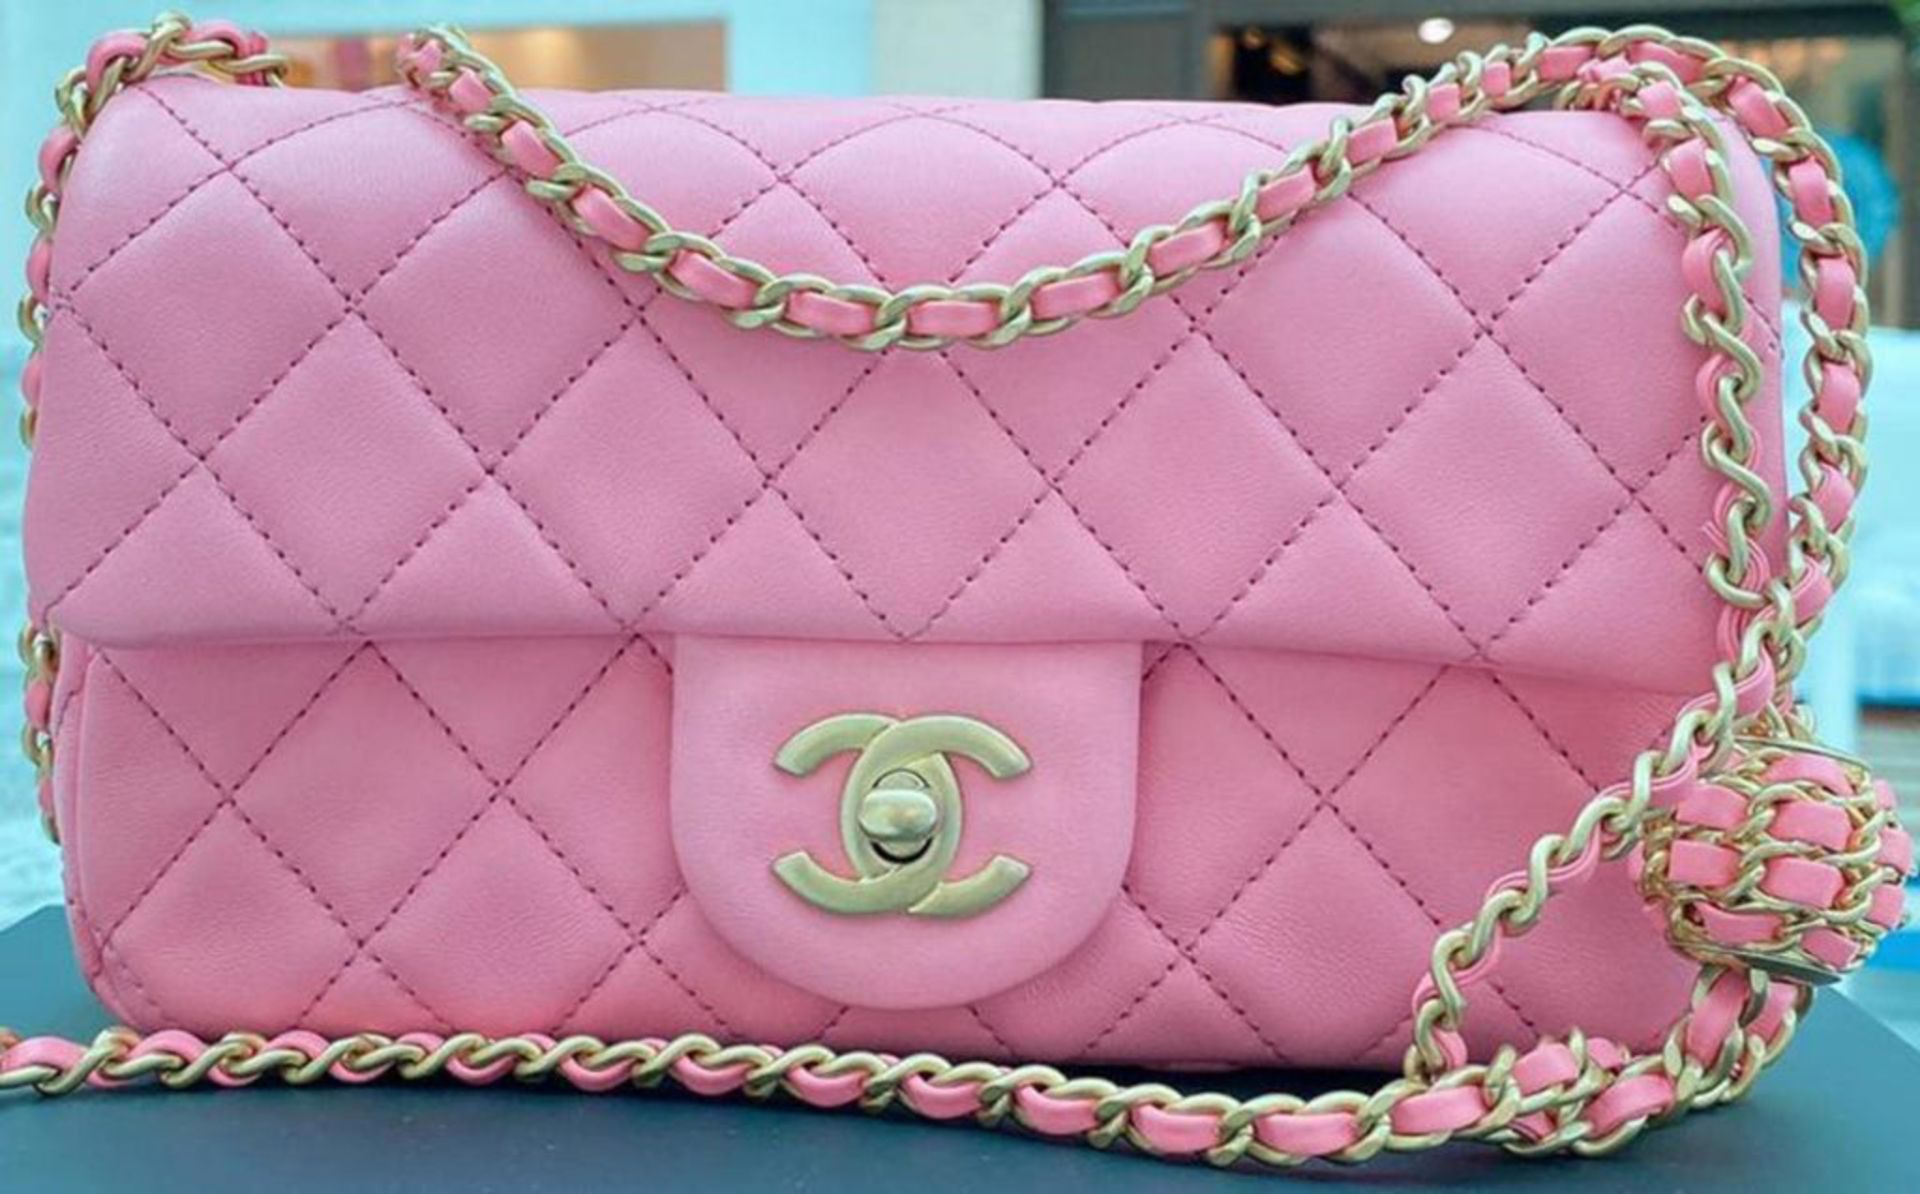 CHANEL QUILTED PINK LAMBSKIN PEARL CRUSH MINI CLASSIC FLAP - Image 10 of 11